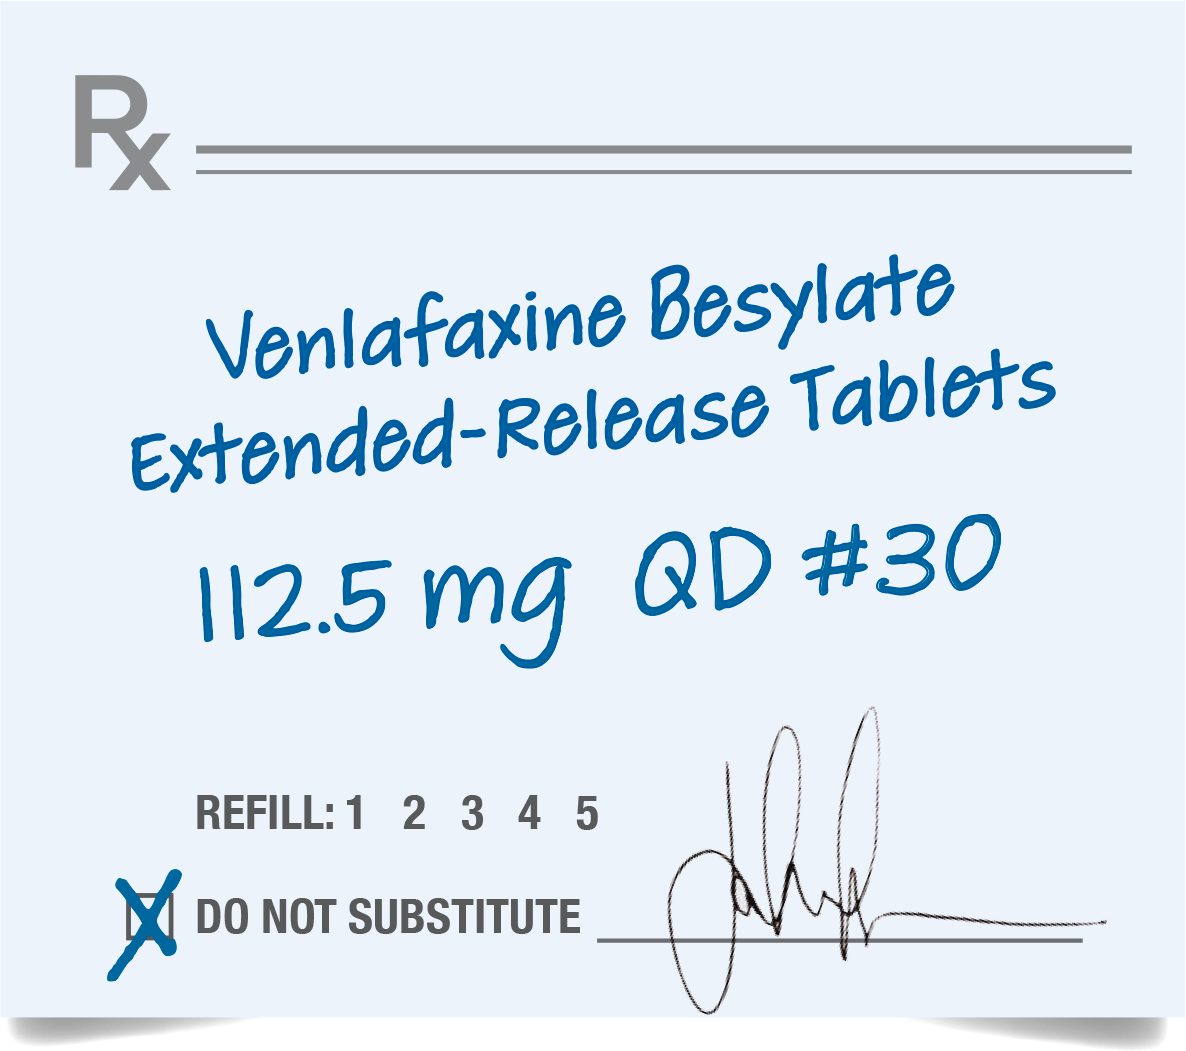 Prescription - Venlafaxine Besylate Extended-Release Tablets 112.5 mg QD #30 - DO NOT SUBSTITUTE